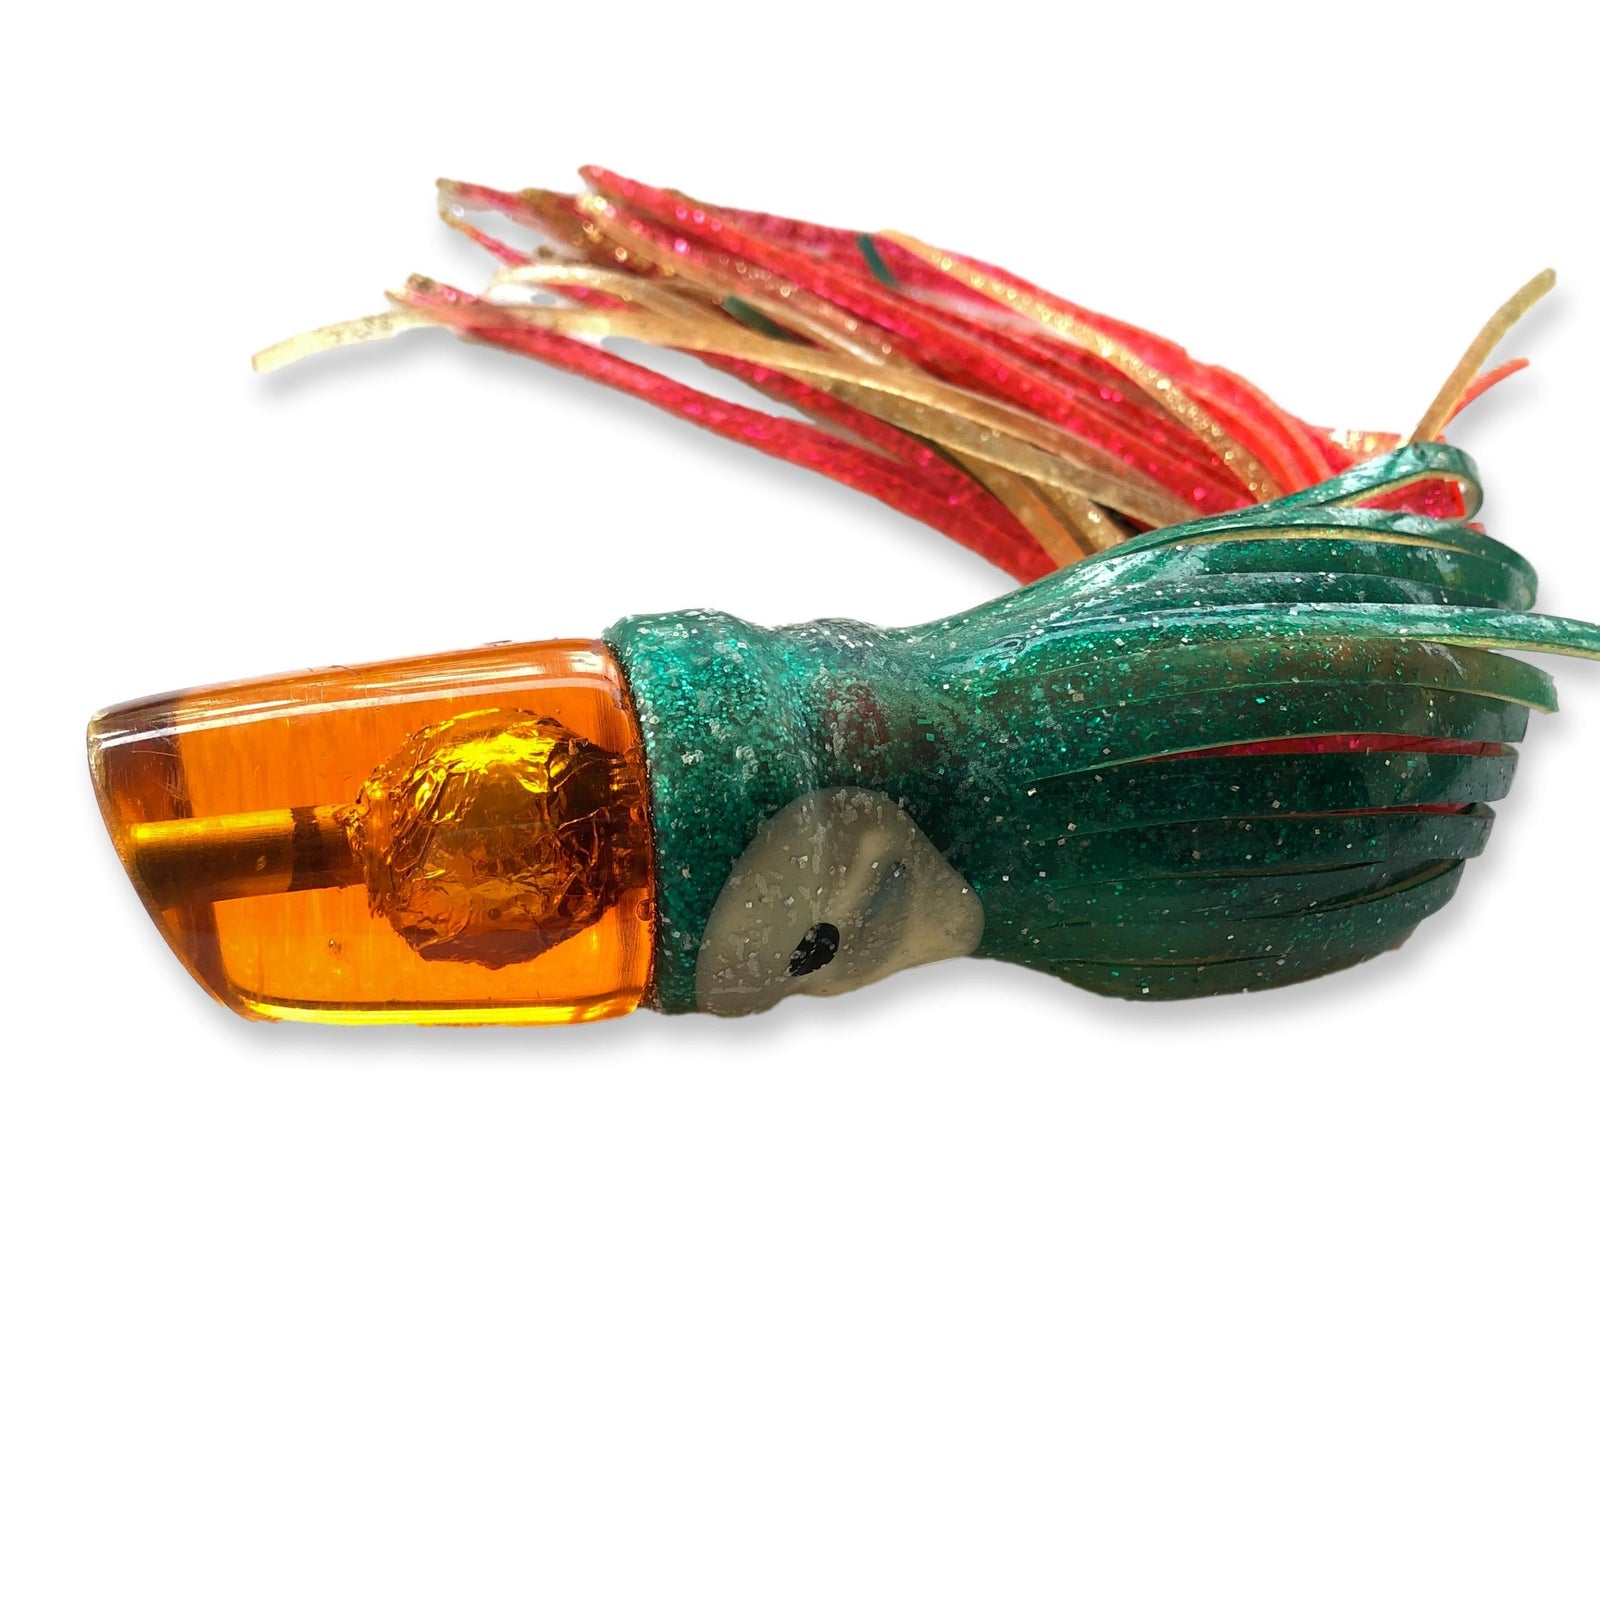 Vintage Lures -In Stock Now. Shop all New and Used Saltwater